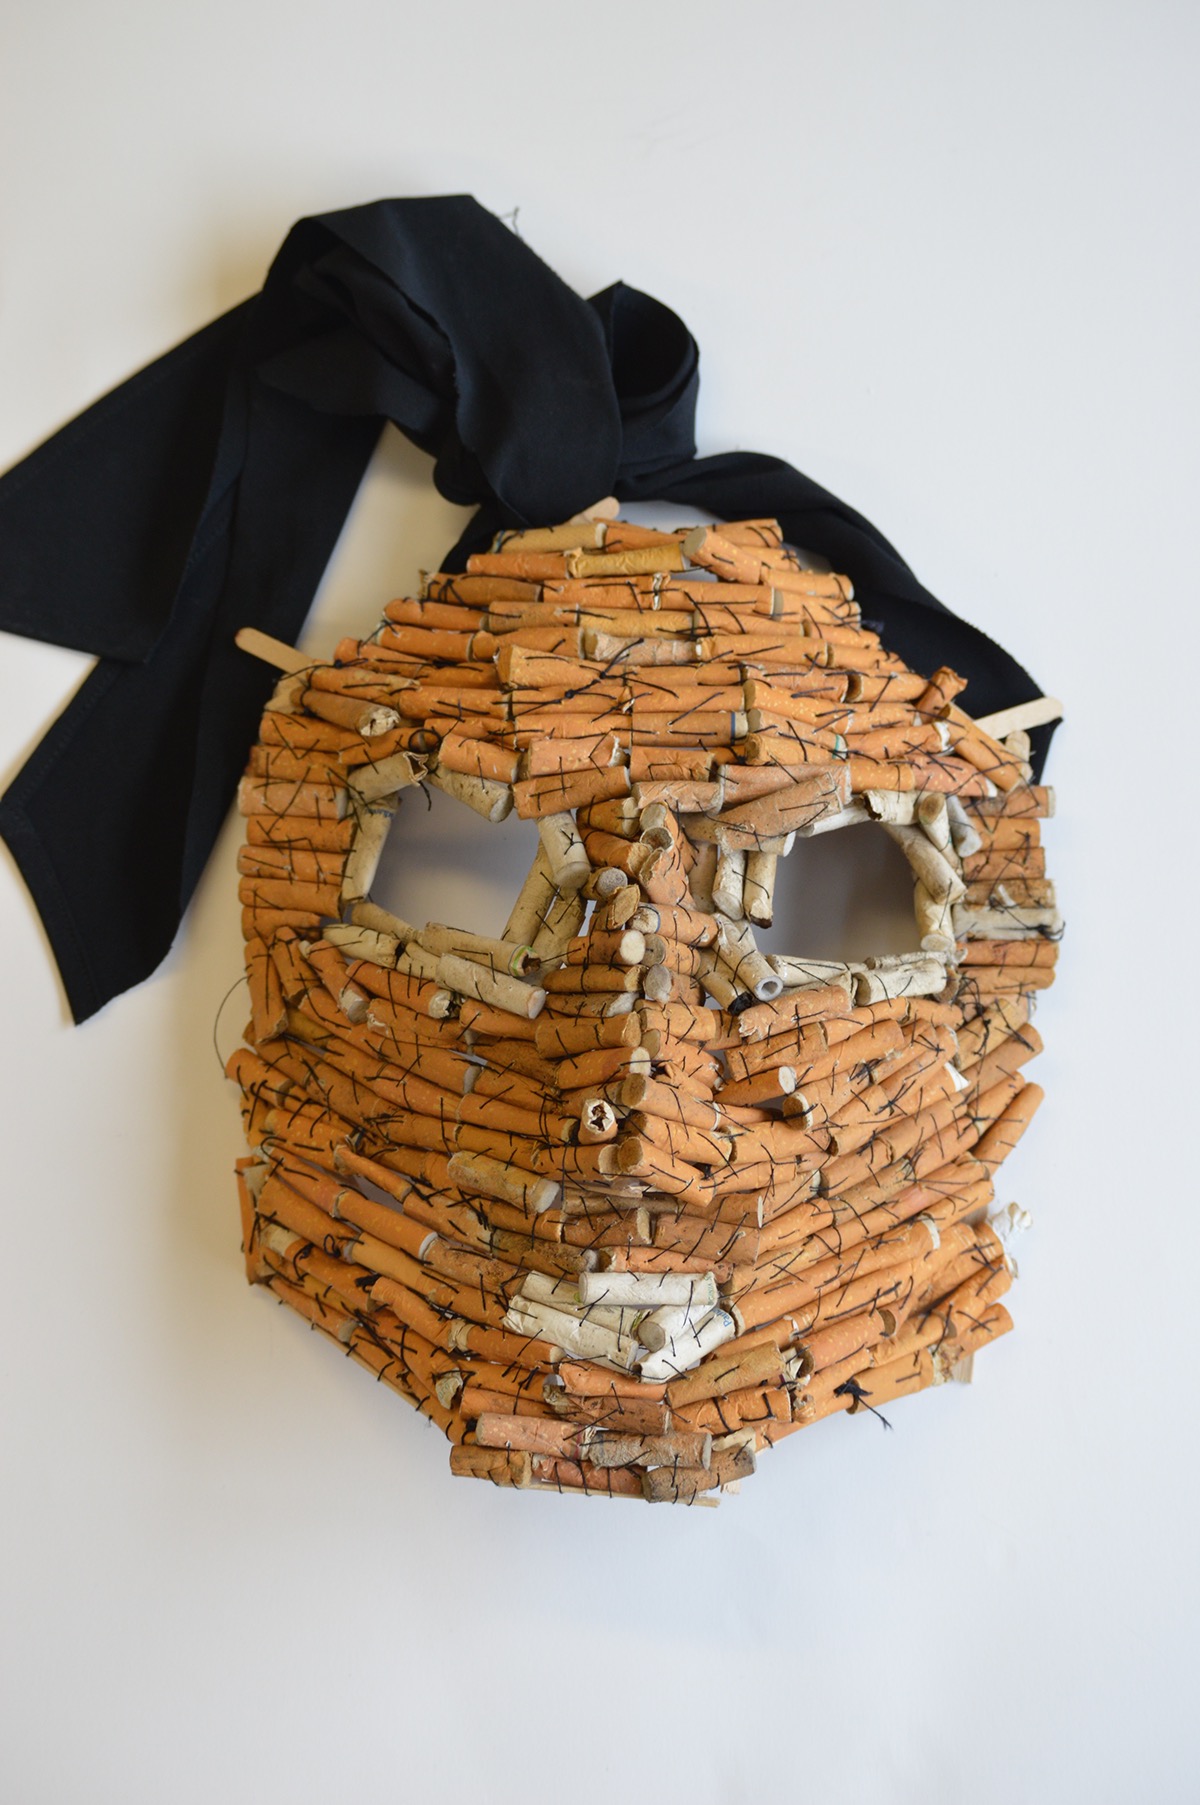 cigarette cigarettes Cigarette Butts mask ashtray found Found objects face appearance